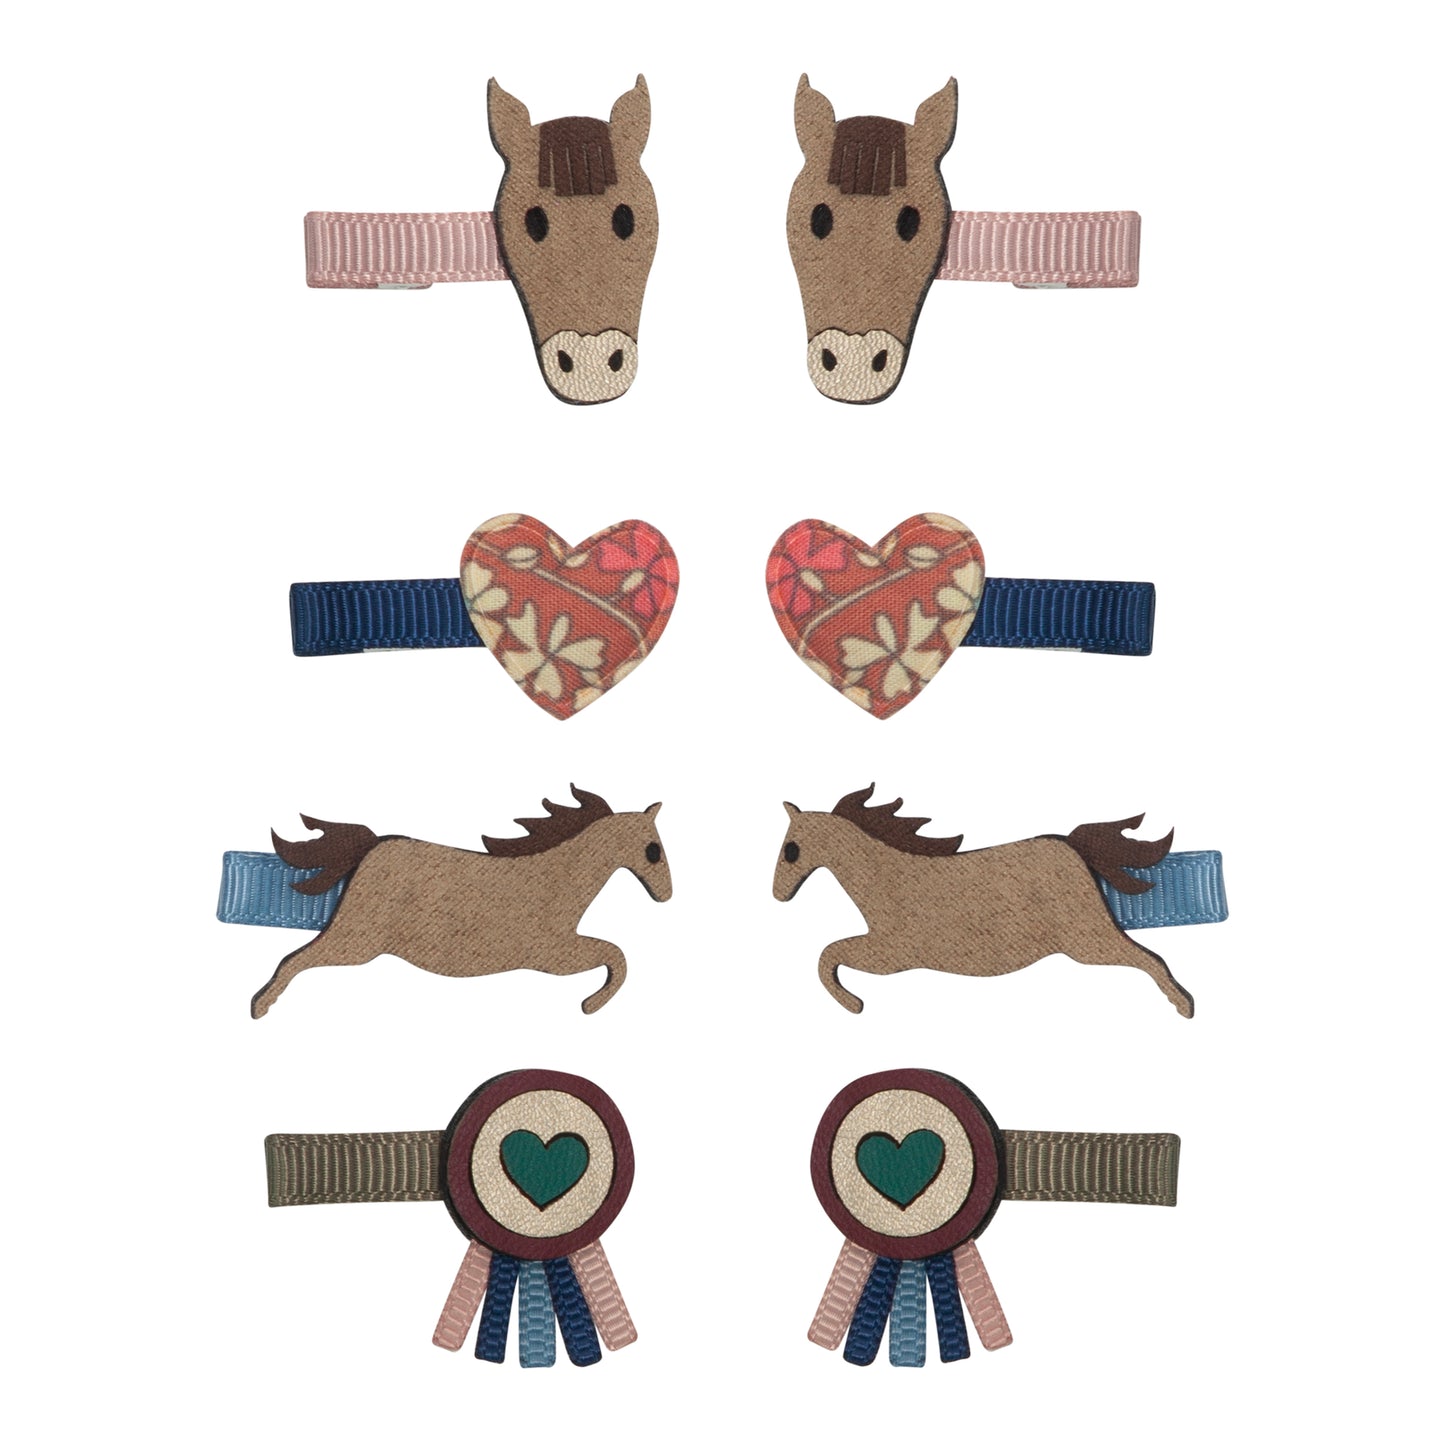 8 in a pack Grosgrain ribbon wrapped alligator clips Ponies and rosettes crafted from soft suedette, floral print, matt and metallic fabrics with grosgrain ribbons to complete the rosettes